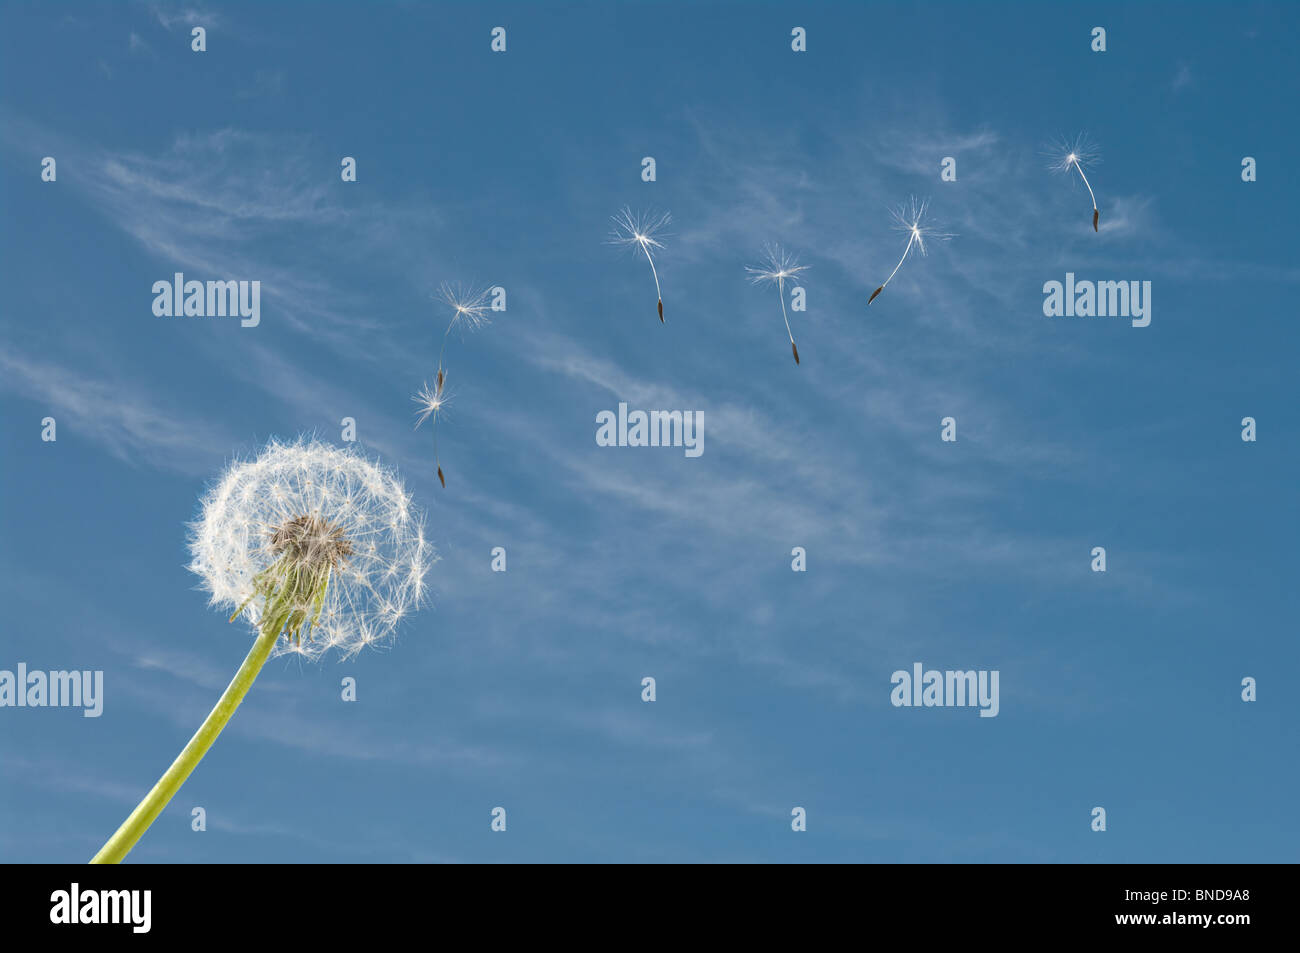 Dandelion blowing seeds and blue sky Stock Photo